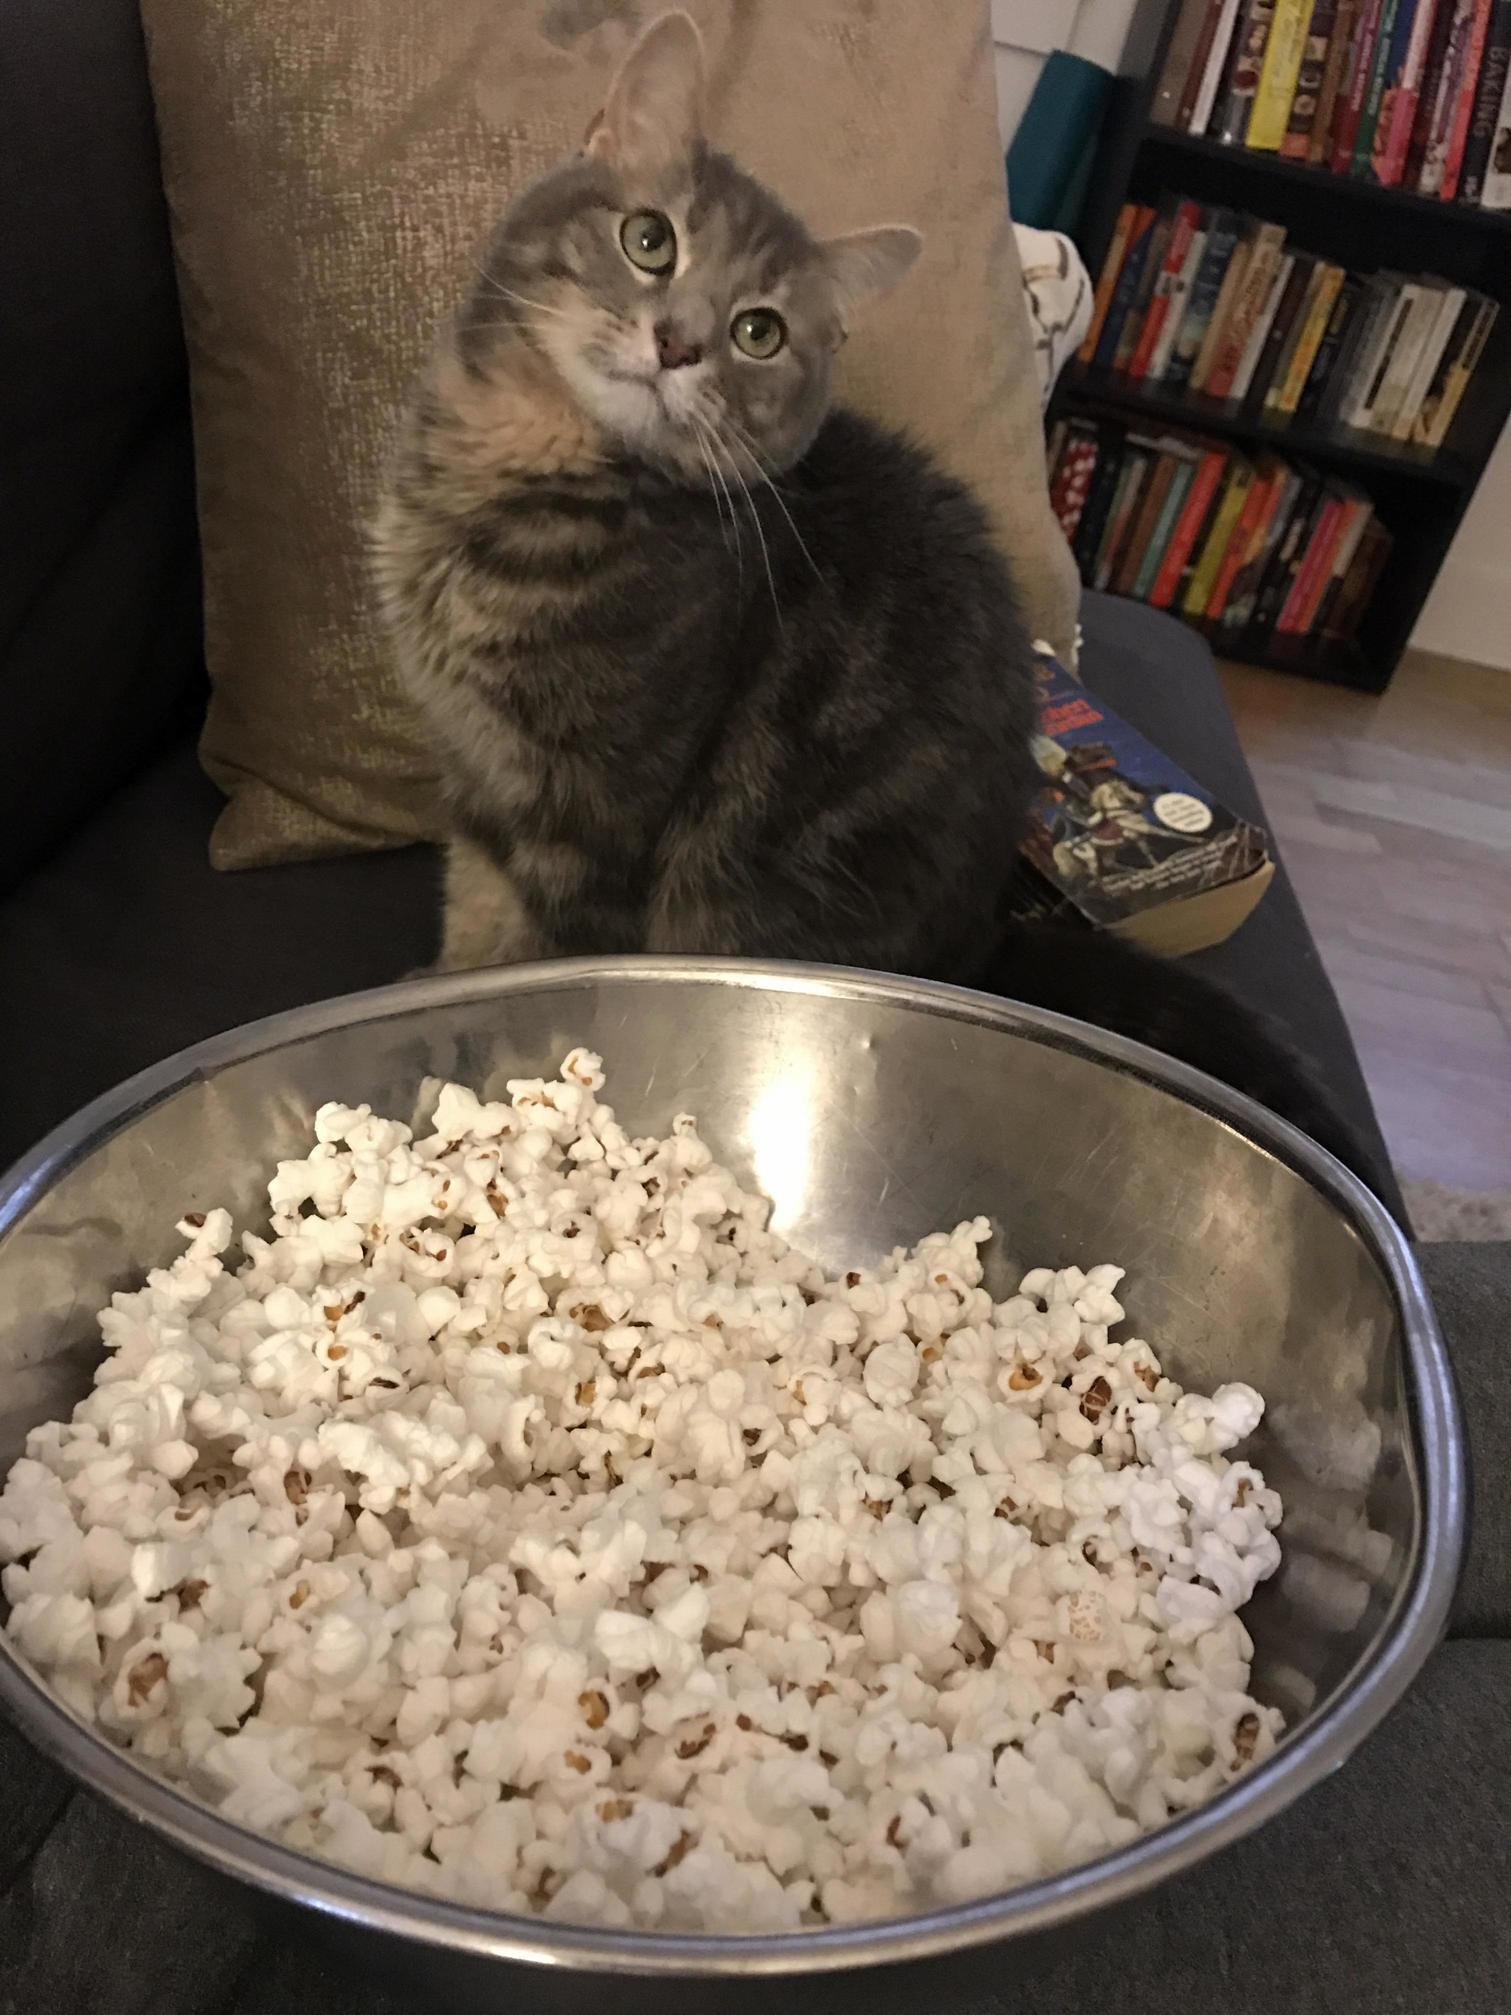 The only time she lets me hold her is to watch the popcorn pop on the stove. then she sits next to me and watches while i eat.